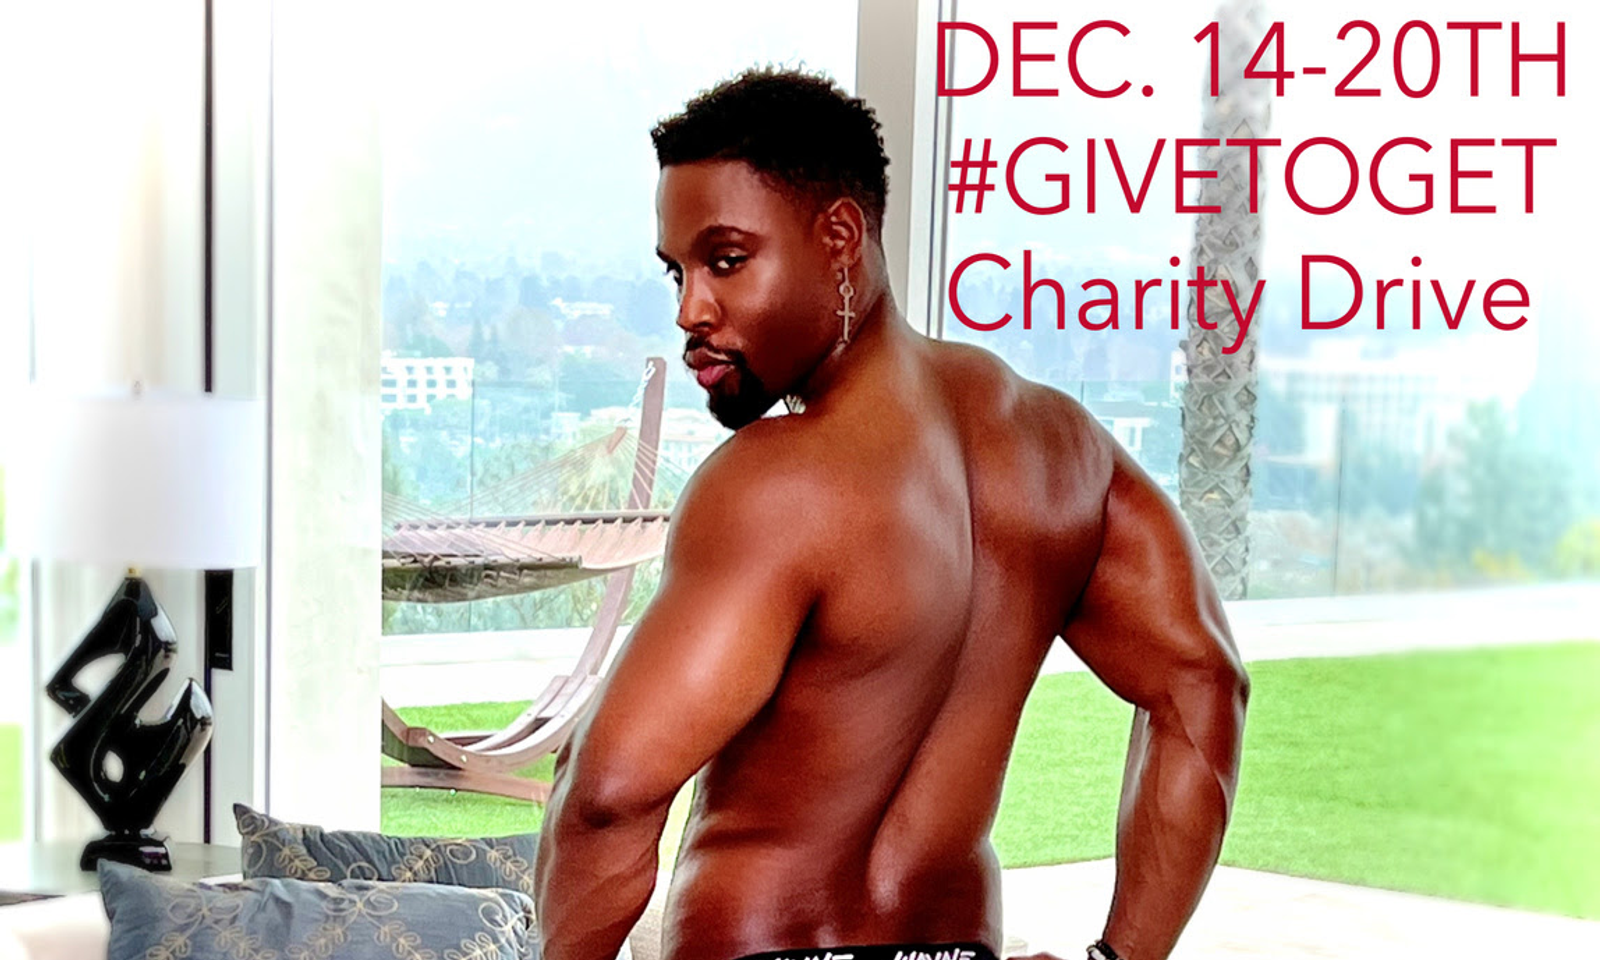 Noir Male, Perry Wayne Launch Joint 'Give to Get' Charity Drive